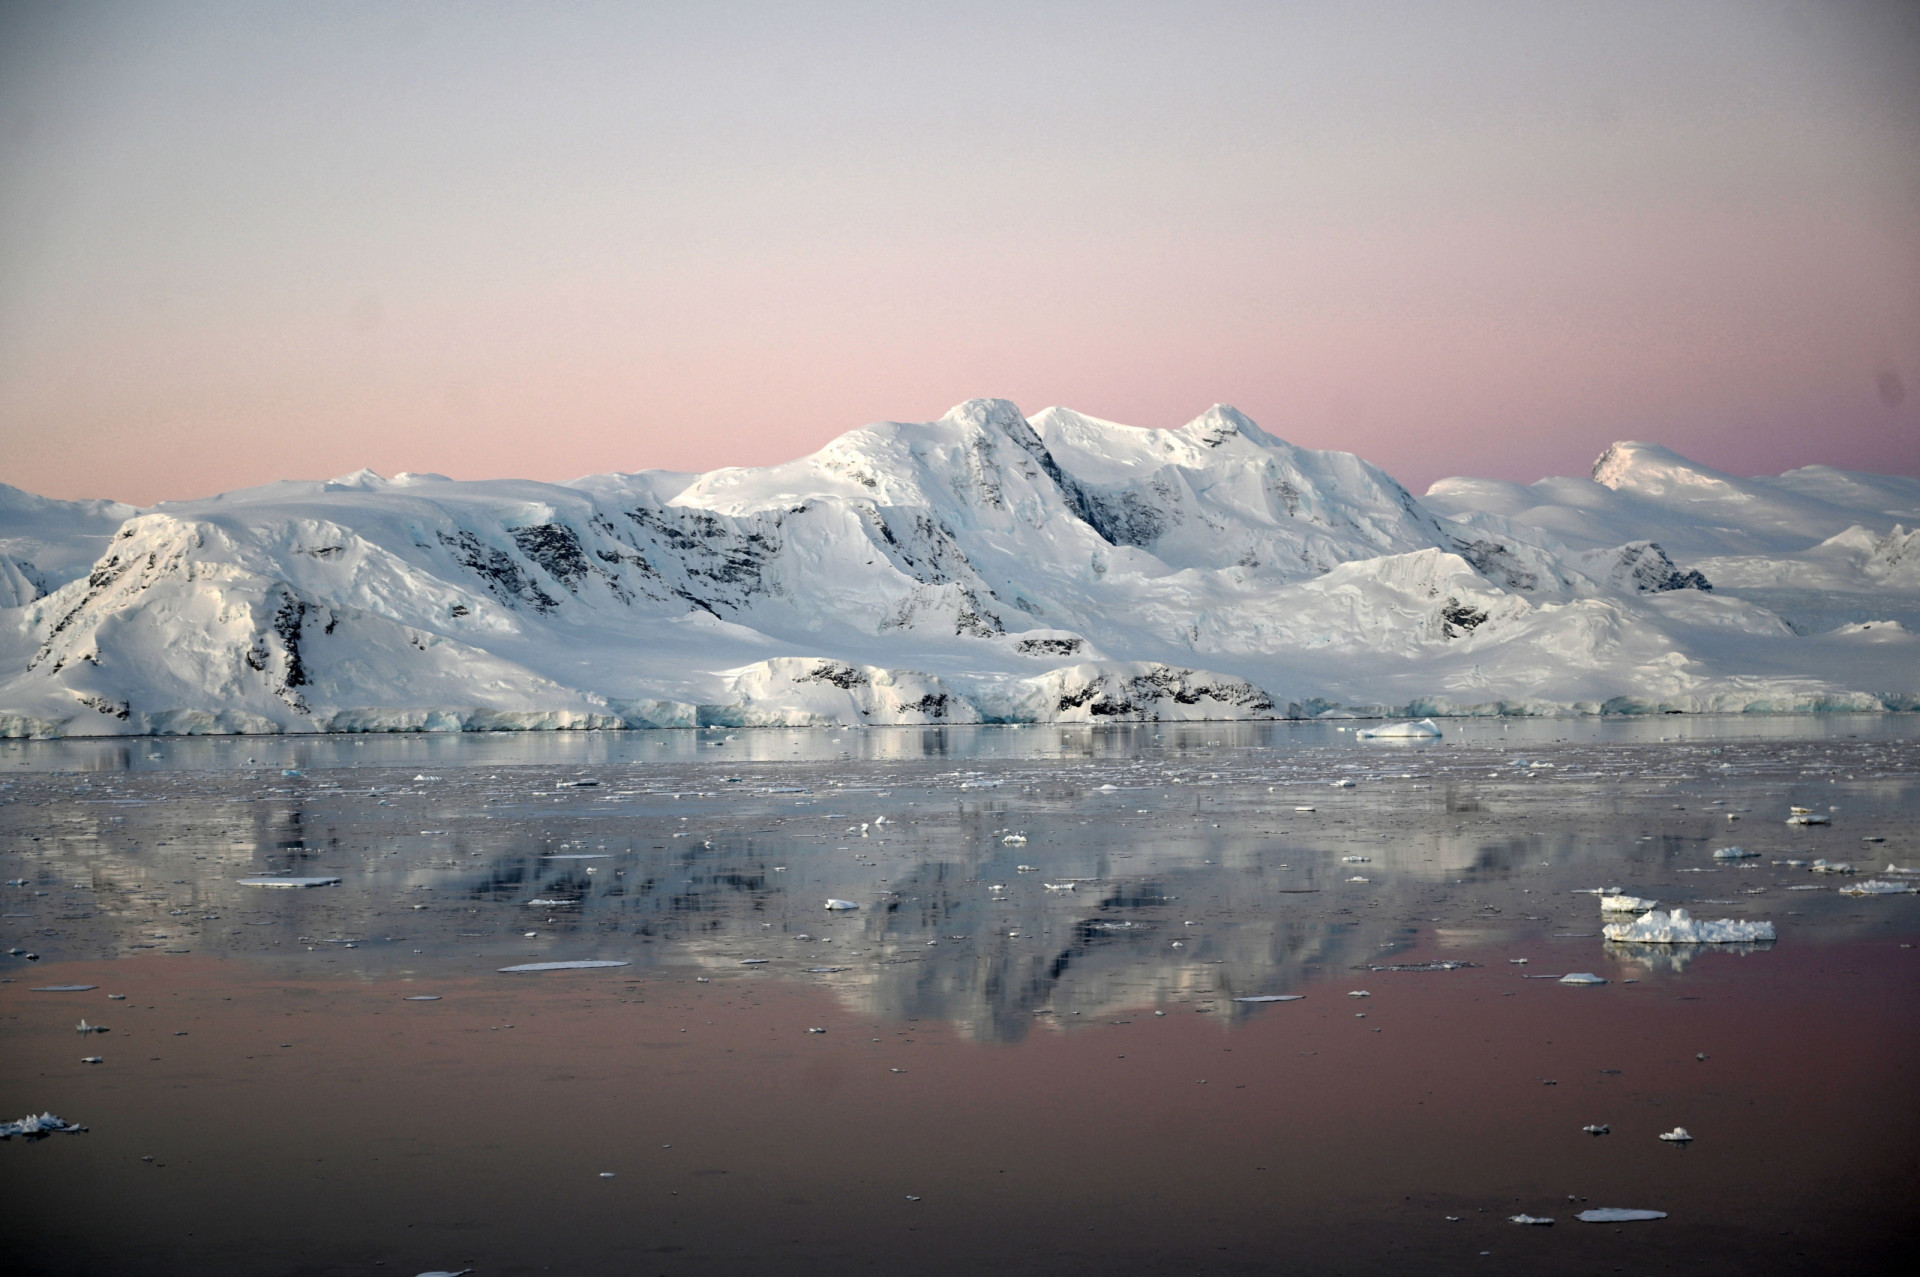 <p>Starting with a flight from the UK to Cape Town, and then a ship to Antarctica, the expedition is supported by leading polar guides. The cost for the nine-day trip is US$71,000.</p>